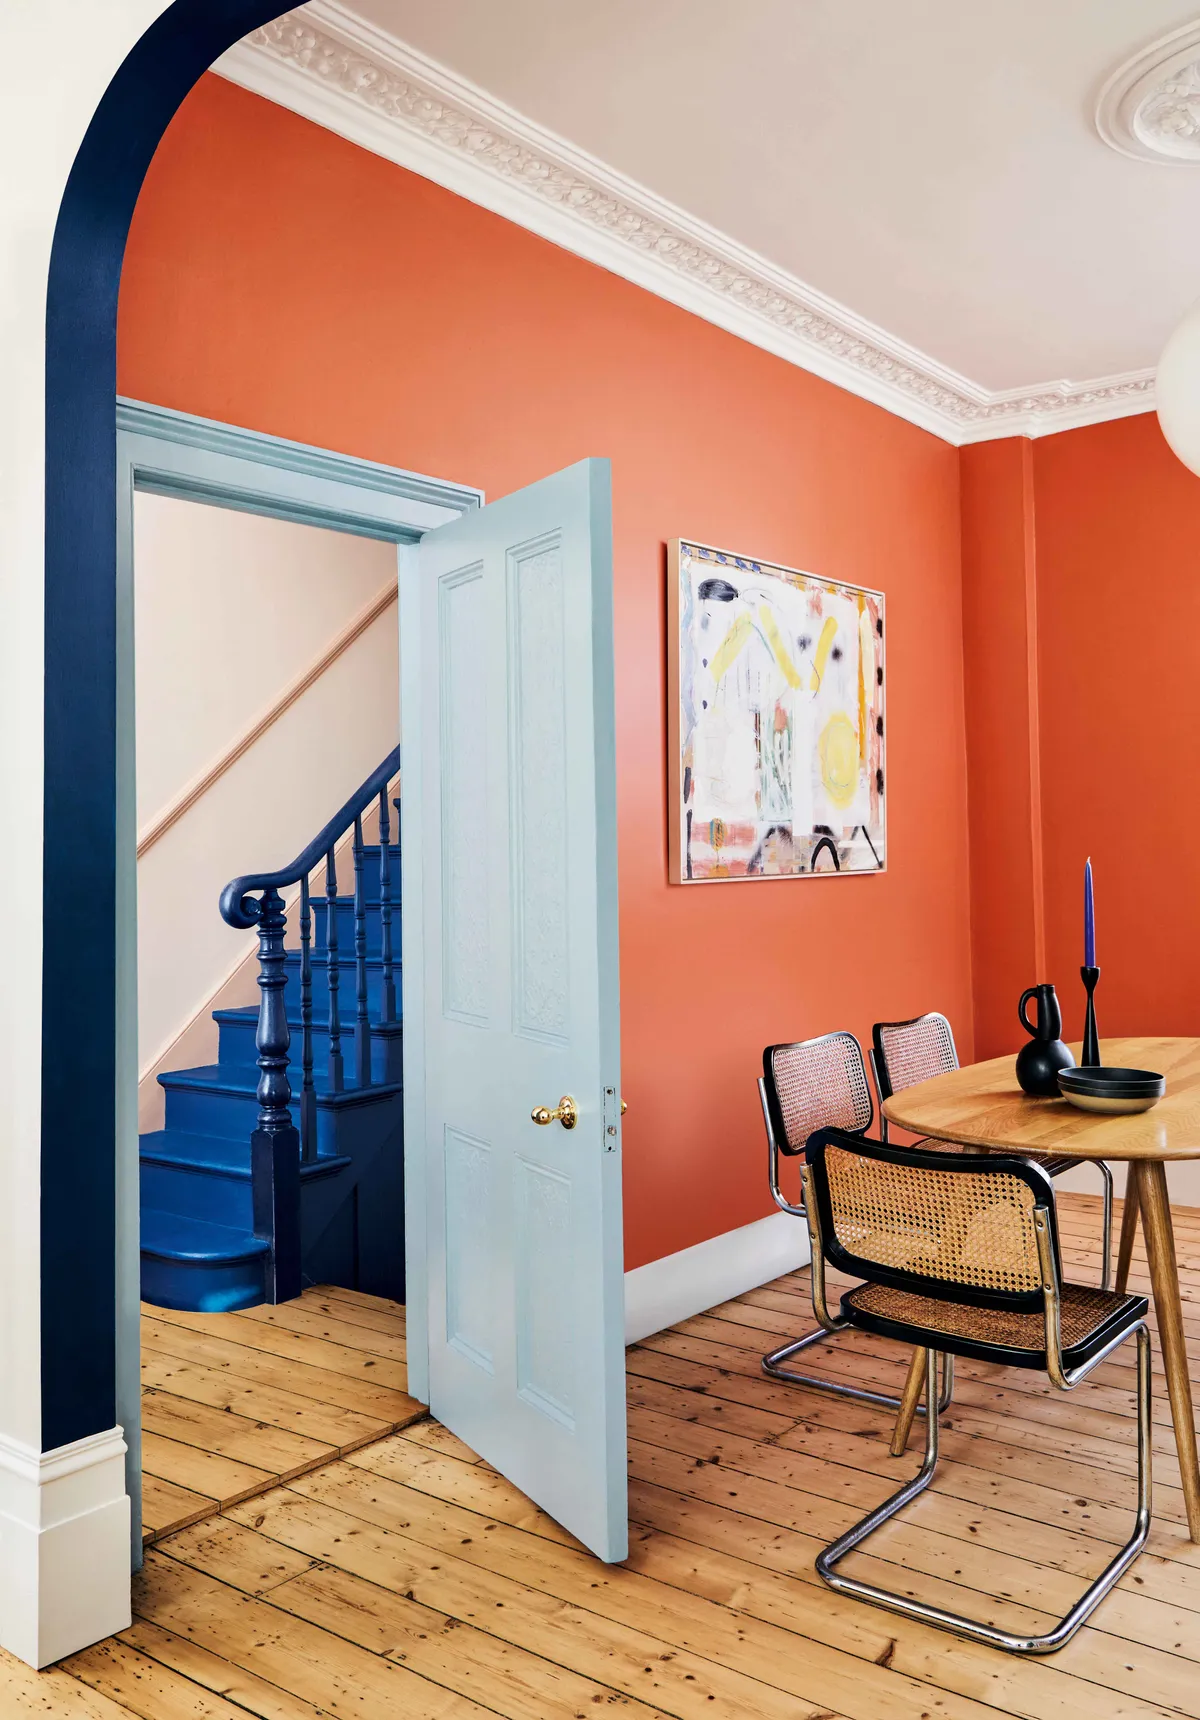 Bedford Square™ 229_(Door)_Coral Orange™ 277_(Walls)_Proper Blue™ 67_(Staircase)_Gentleman's Pink™ 22_(Wall)_Peach Flesh Pink™ 268_(Dado)_Archive Collection_Mylands_2021_1